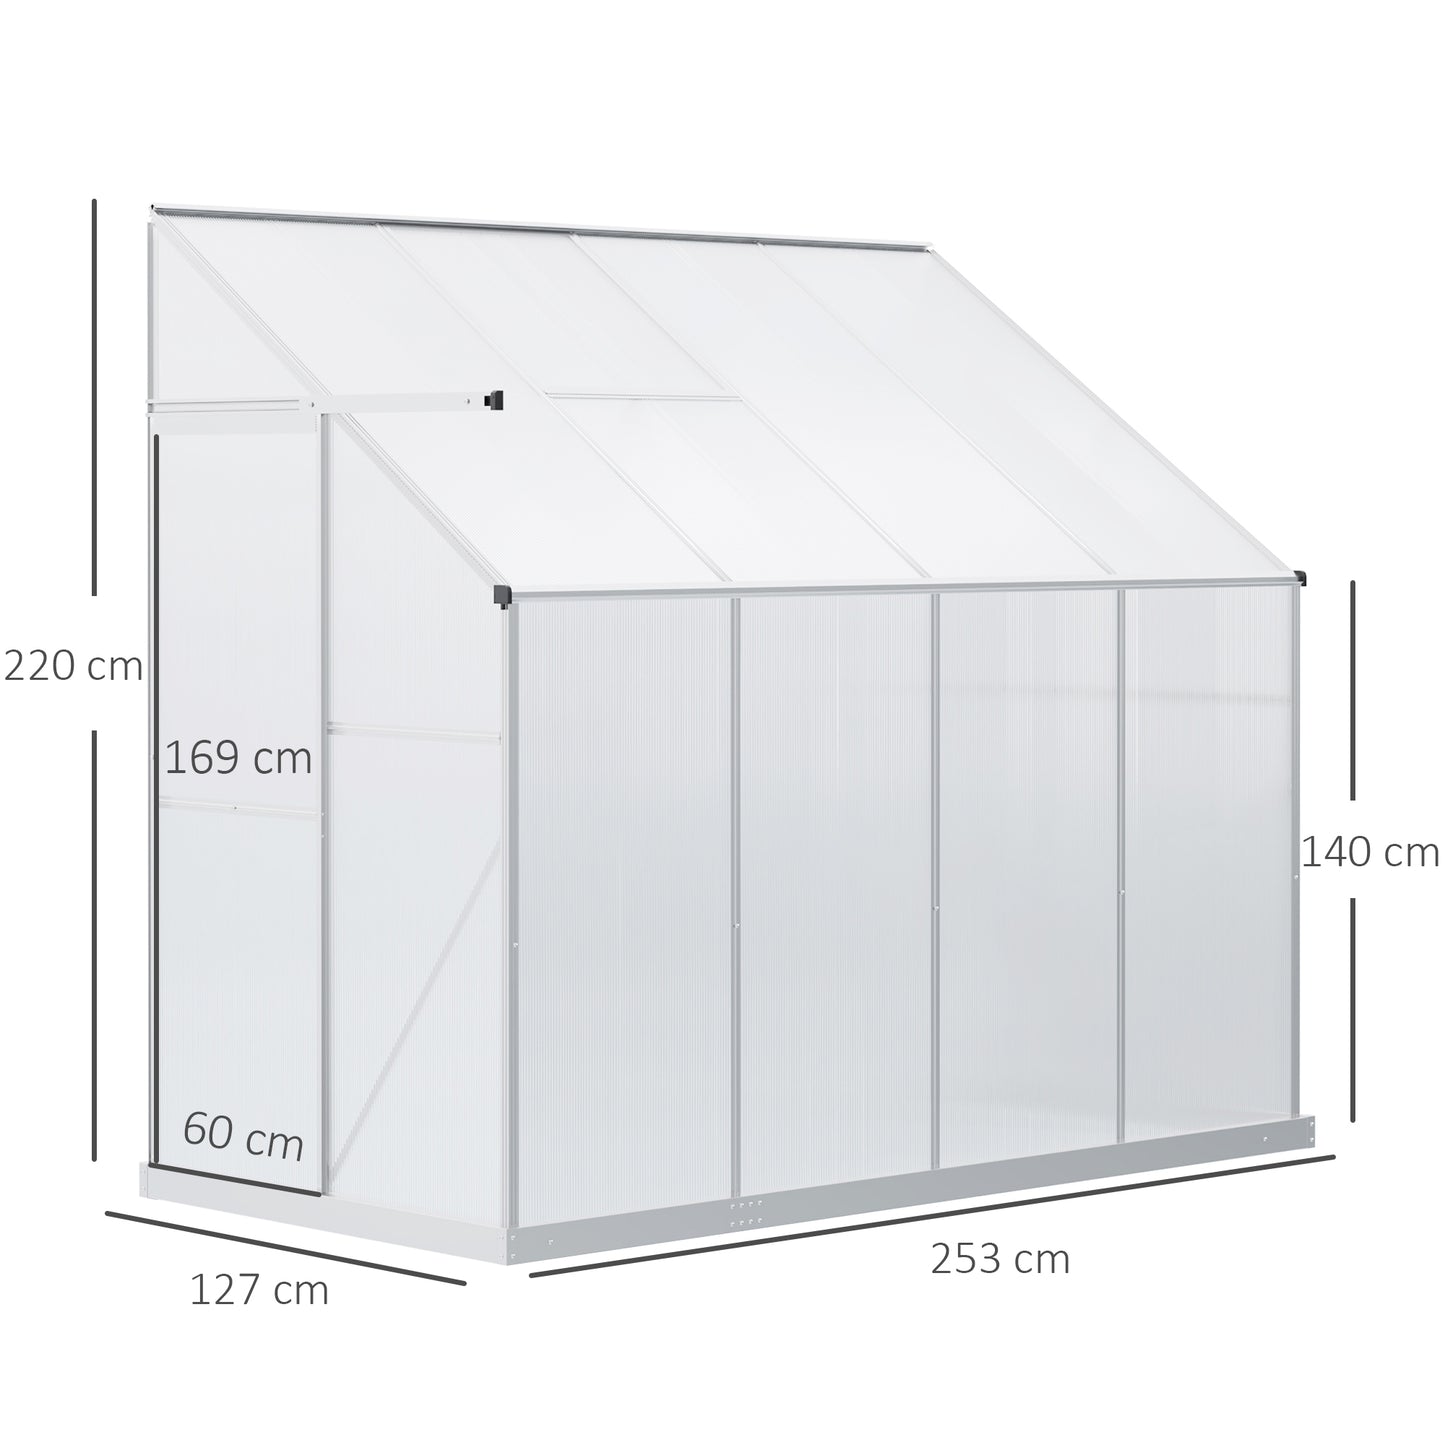 Outsunny Walk-In Lean to Greenhouse Garden Heavy Duty Aluminium Polycarbonate with Roof Vent for Plants Herbs Vegetables, Silver, 253 x 127 x 220 cm